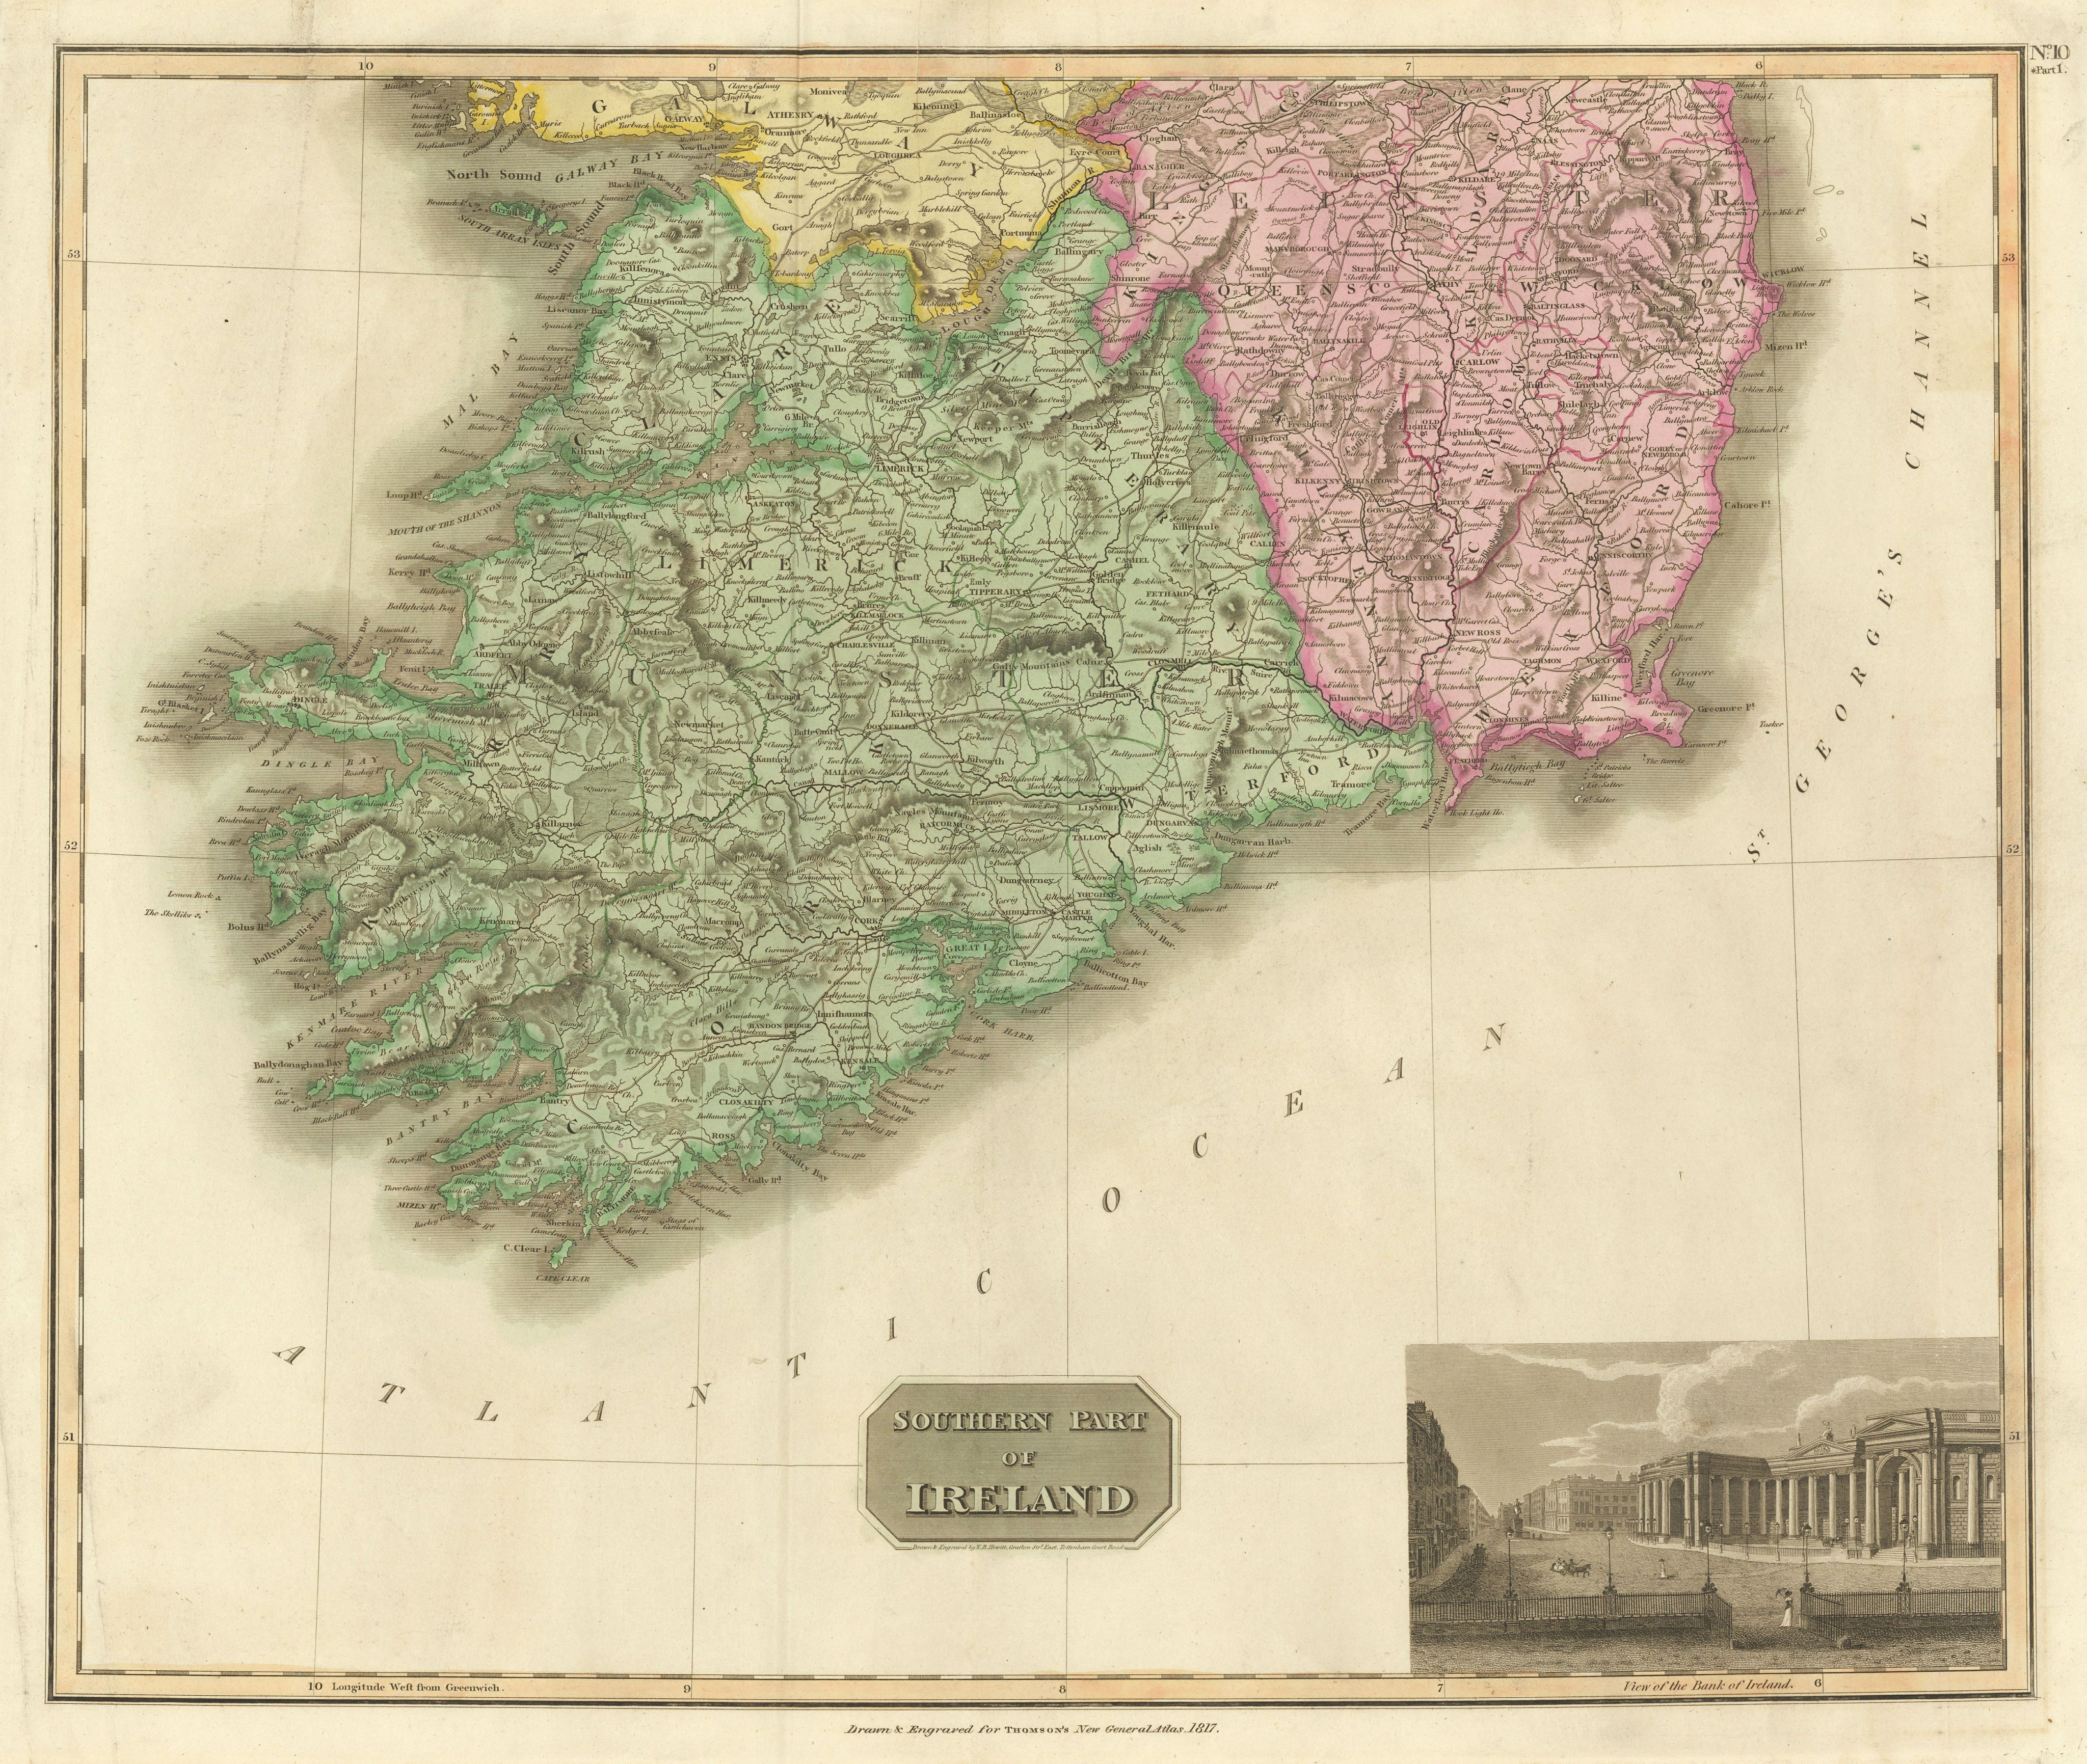 Associate Product Southern part of Ireland. Munster Leinster. Coach roads. THOMSON 1817 old map